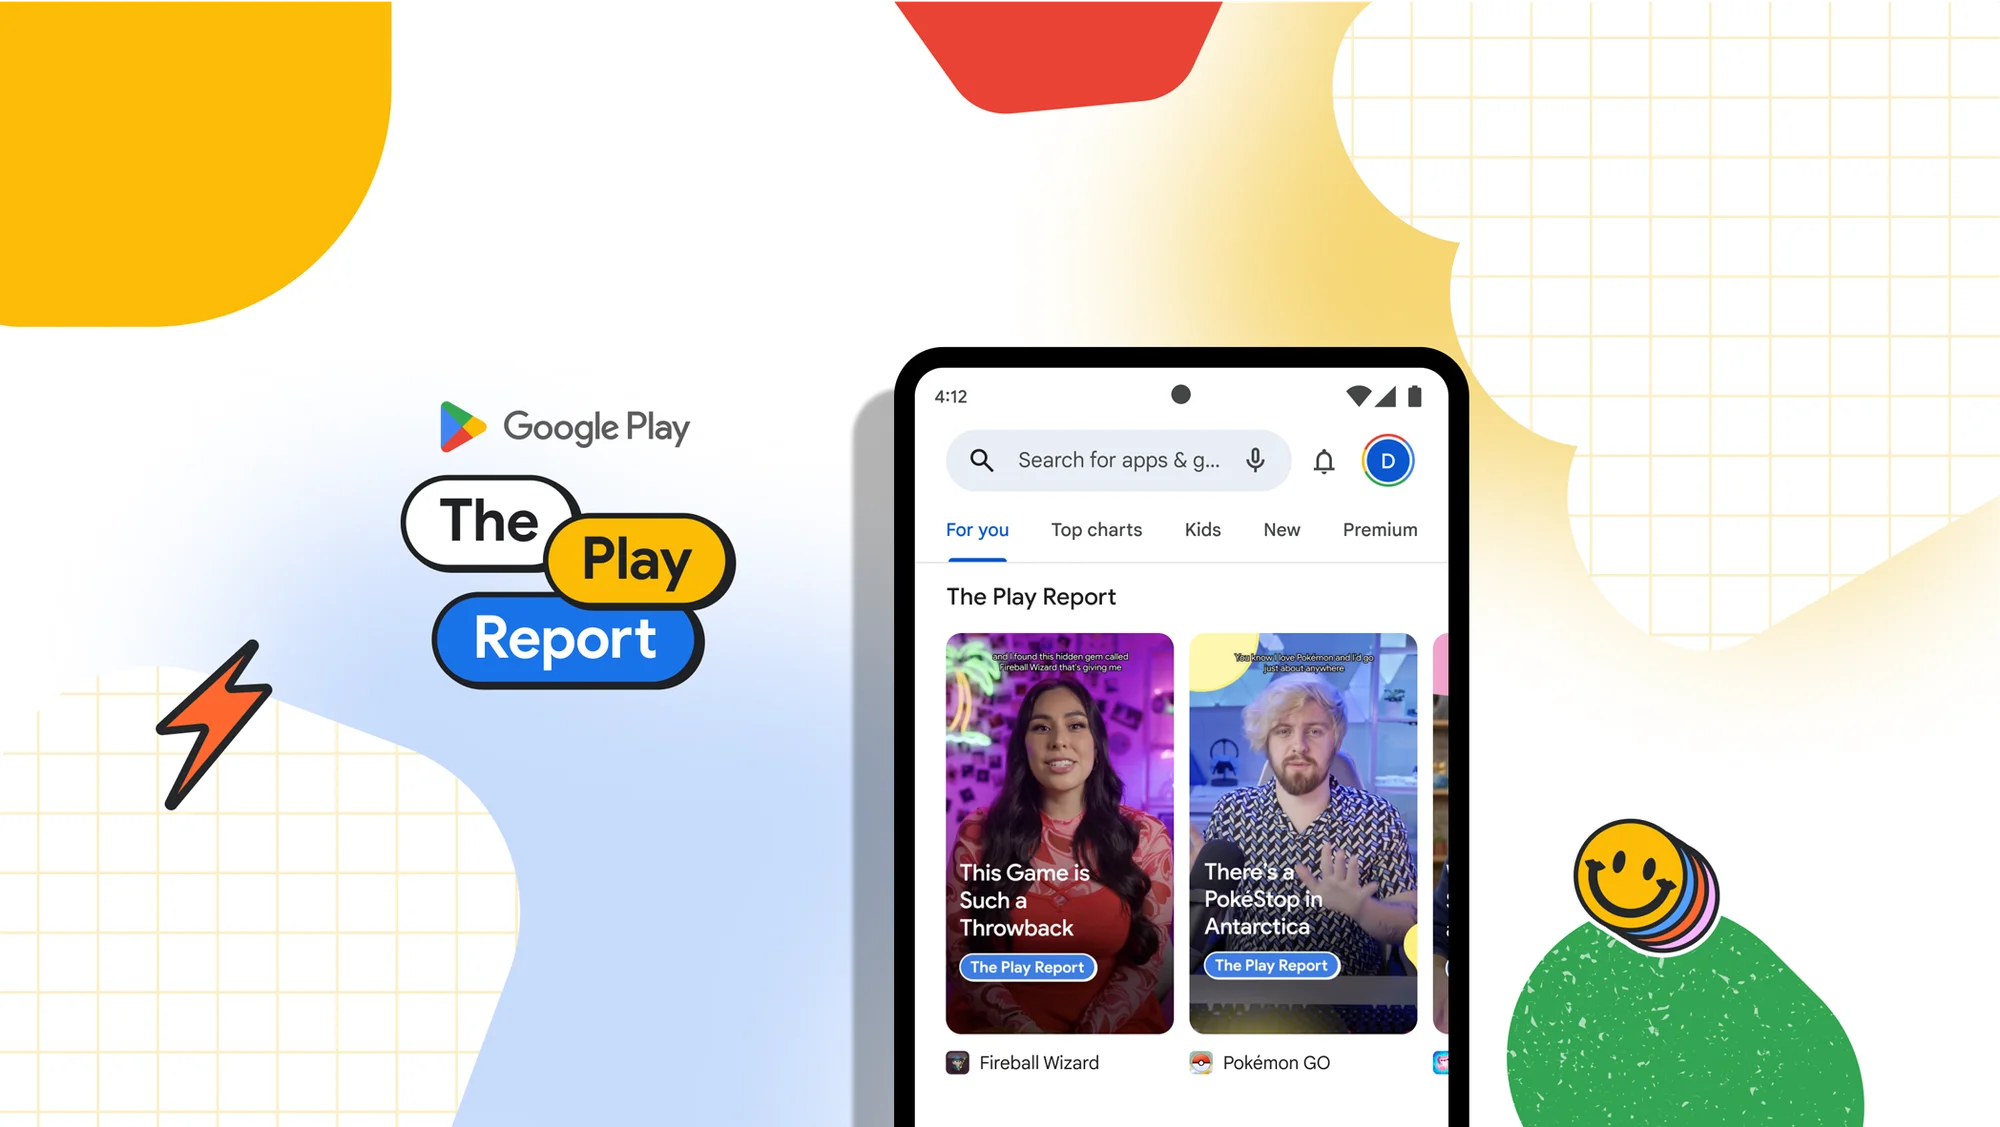 Play Together – Apps no Google Play